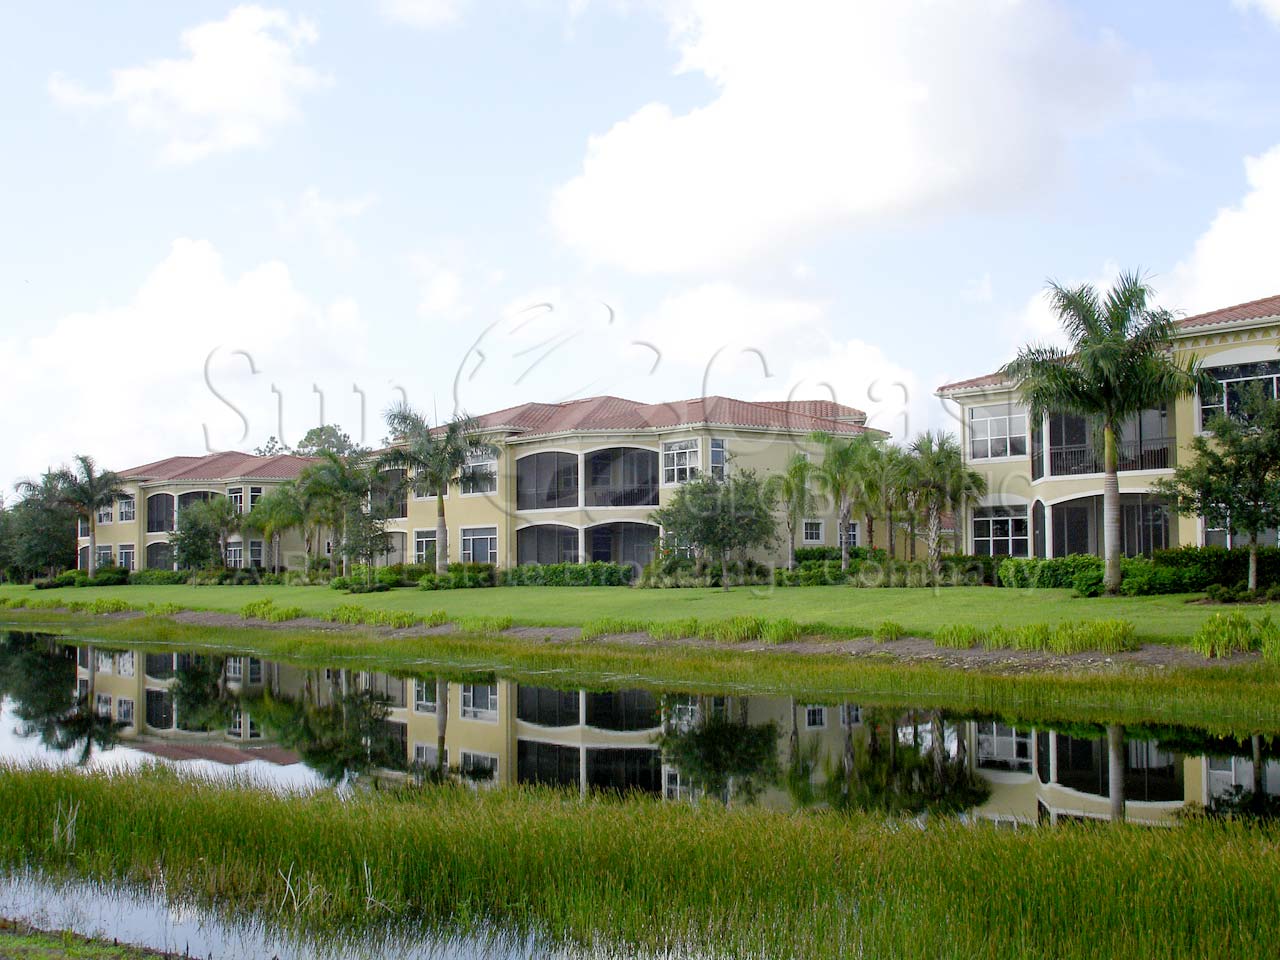 Calabria waterfront coach homes